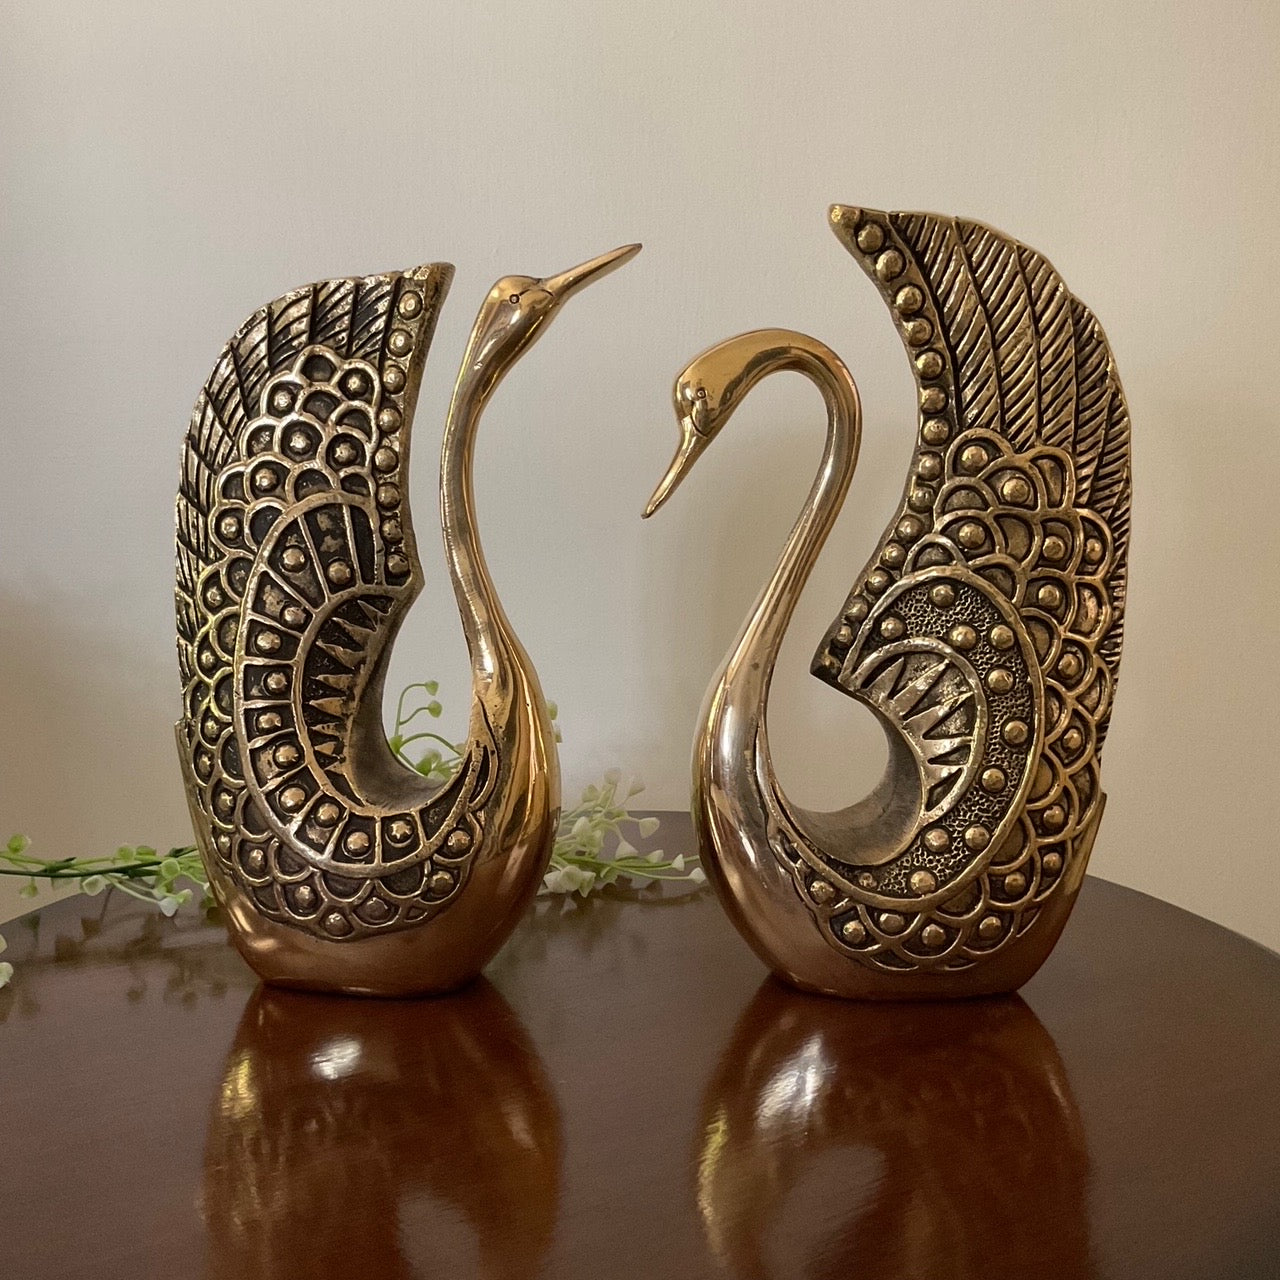 Handcrafted Brass Swan (set of 2) - Decorative Figurines